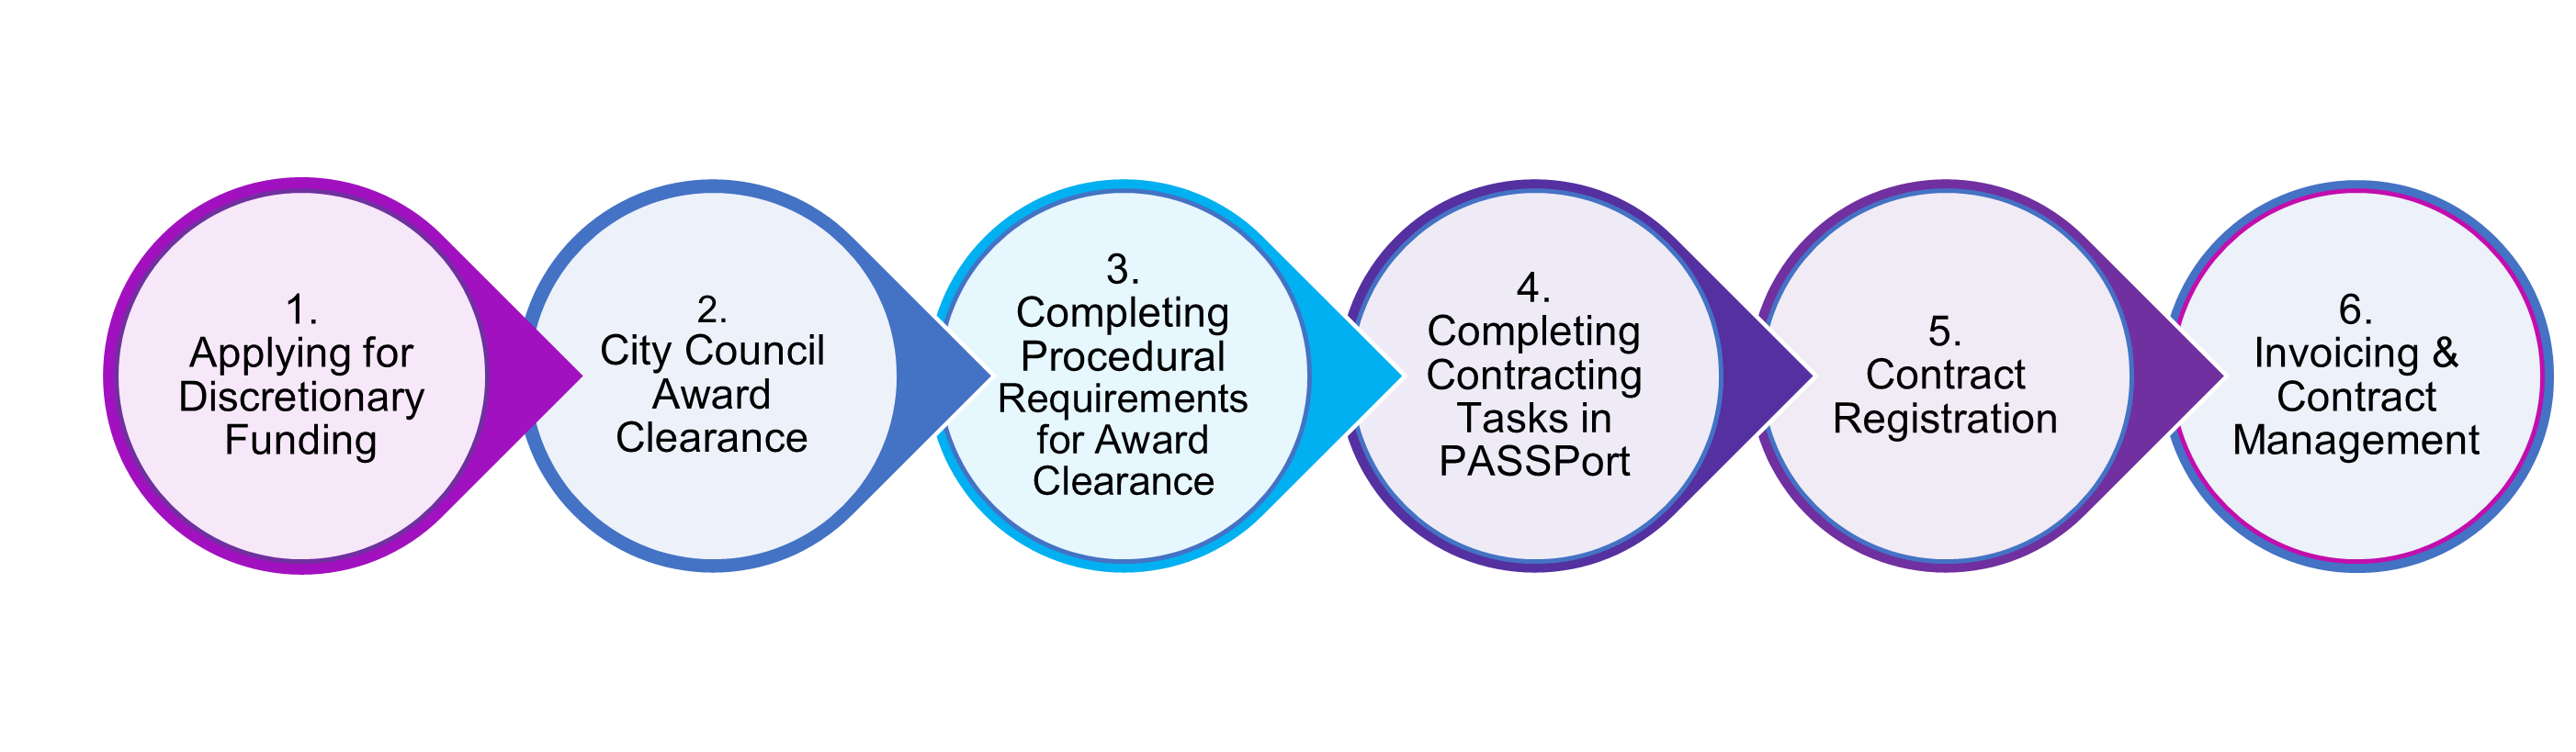 6 steps of the Discretionary Award Contracting Process